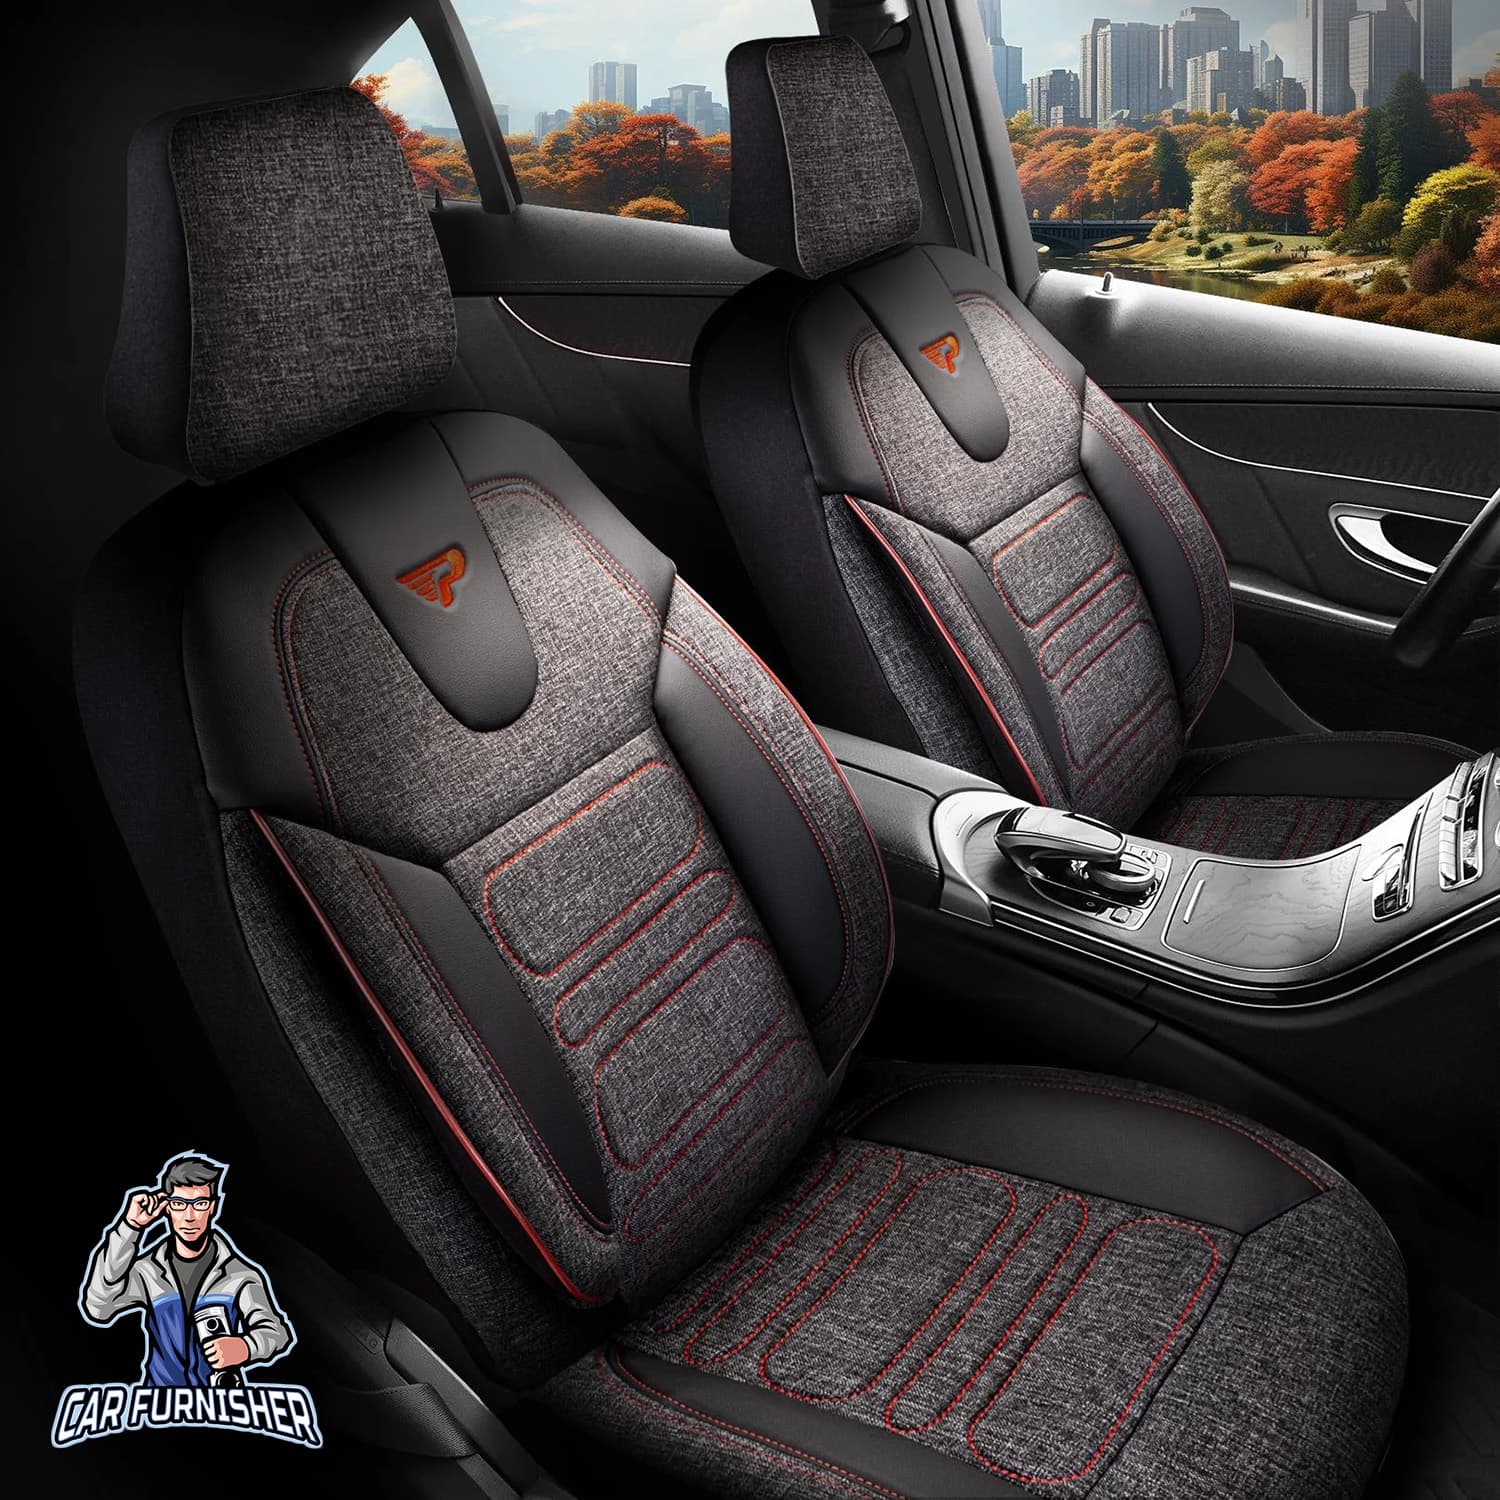 Give Your Passat a Fresh Look with New Volkswagen Passat Car Seat Covers